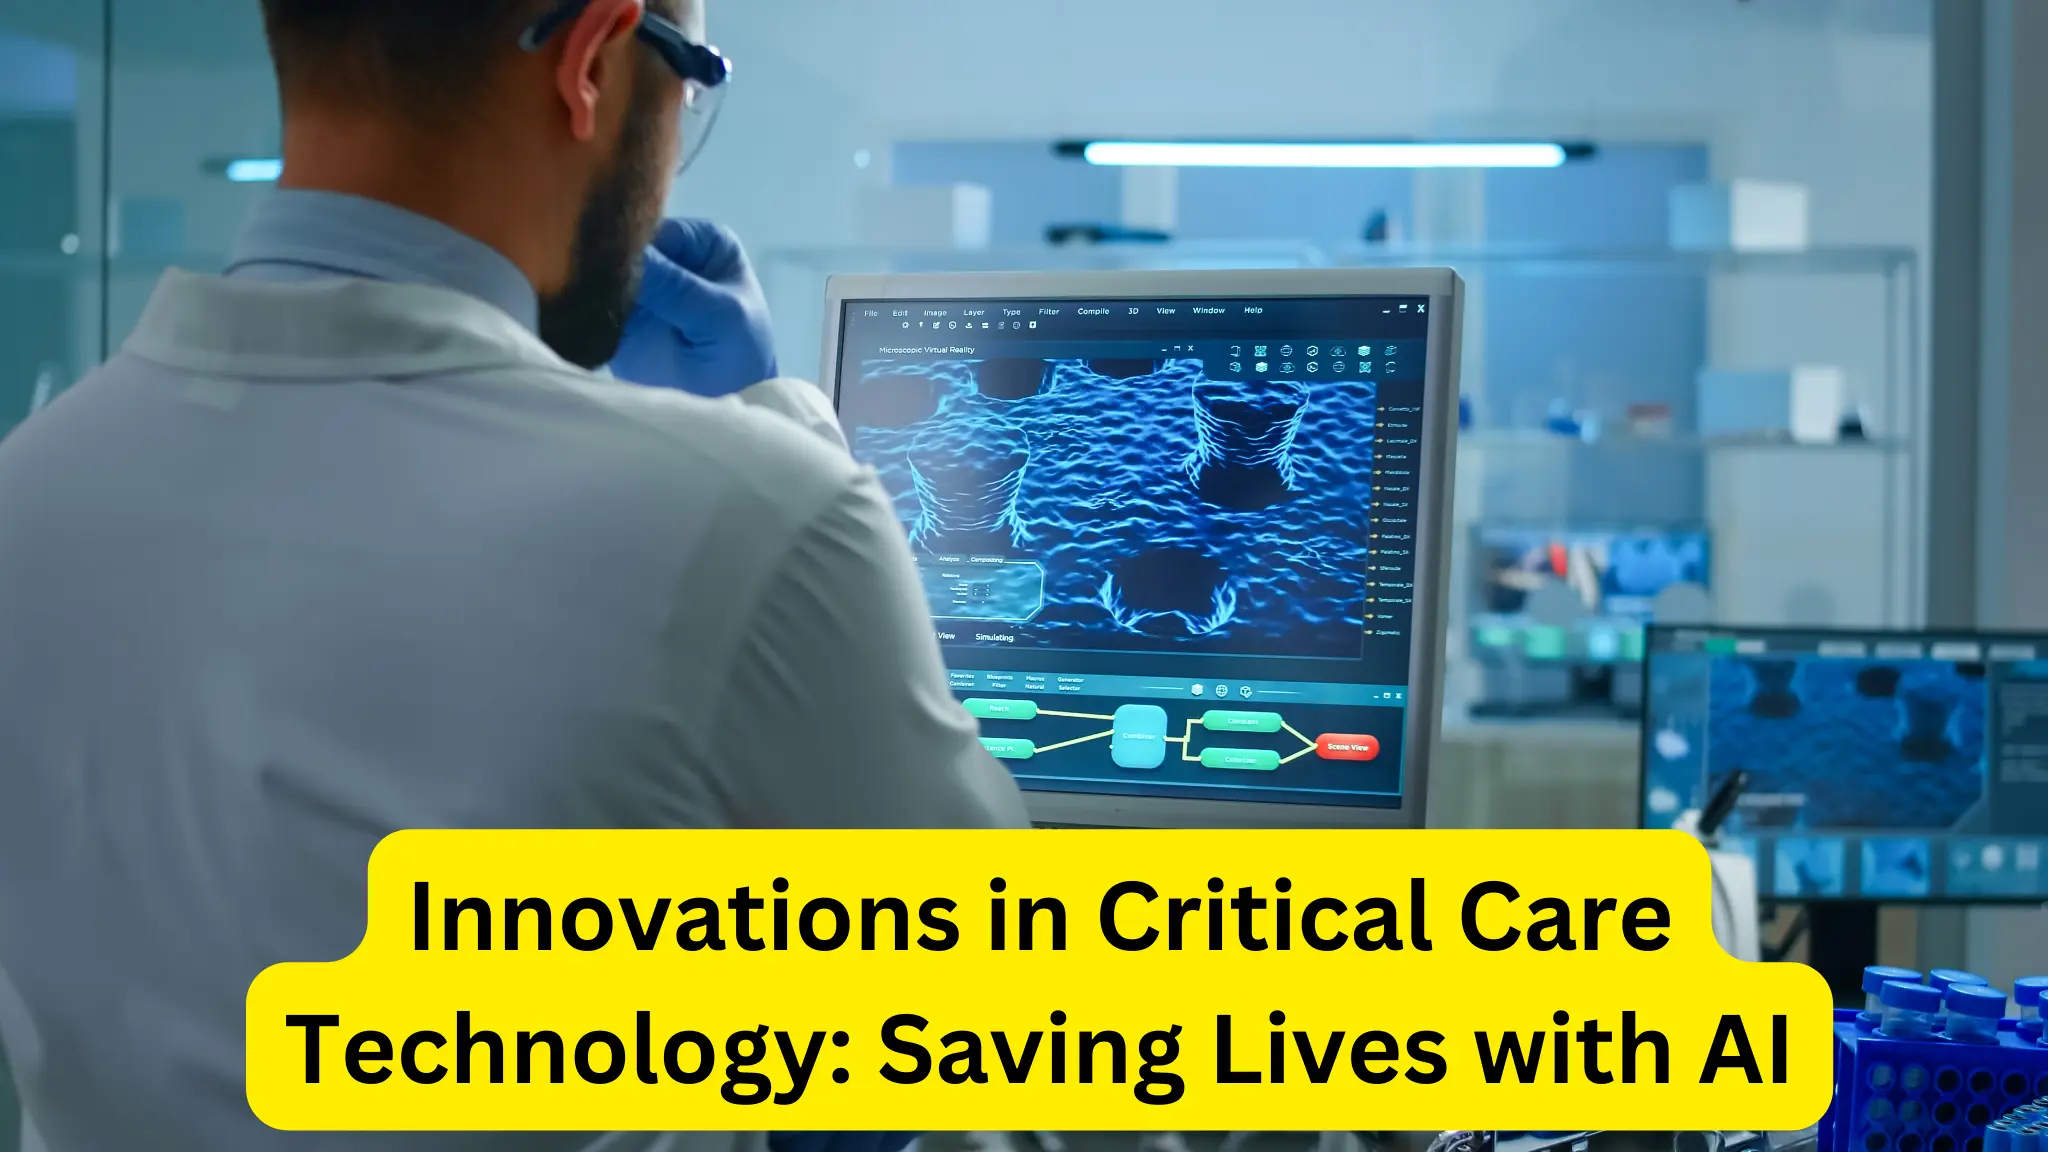 Innovations in Critical Care Technology: Saving Lives with AI